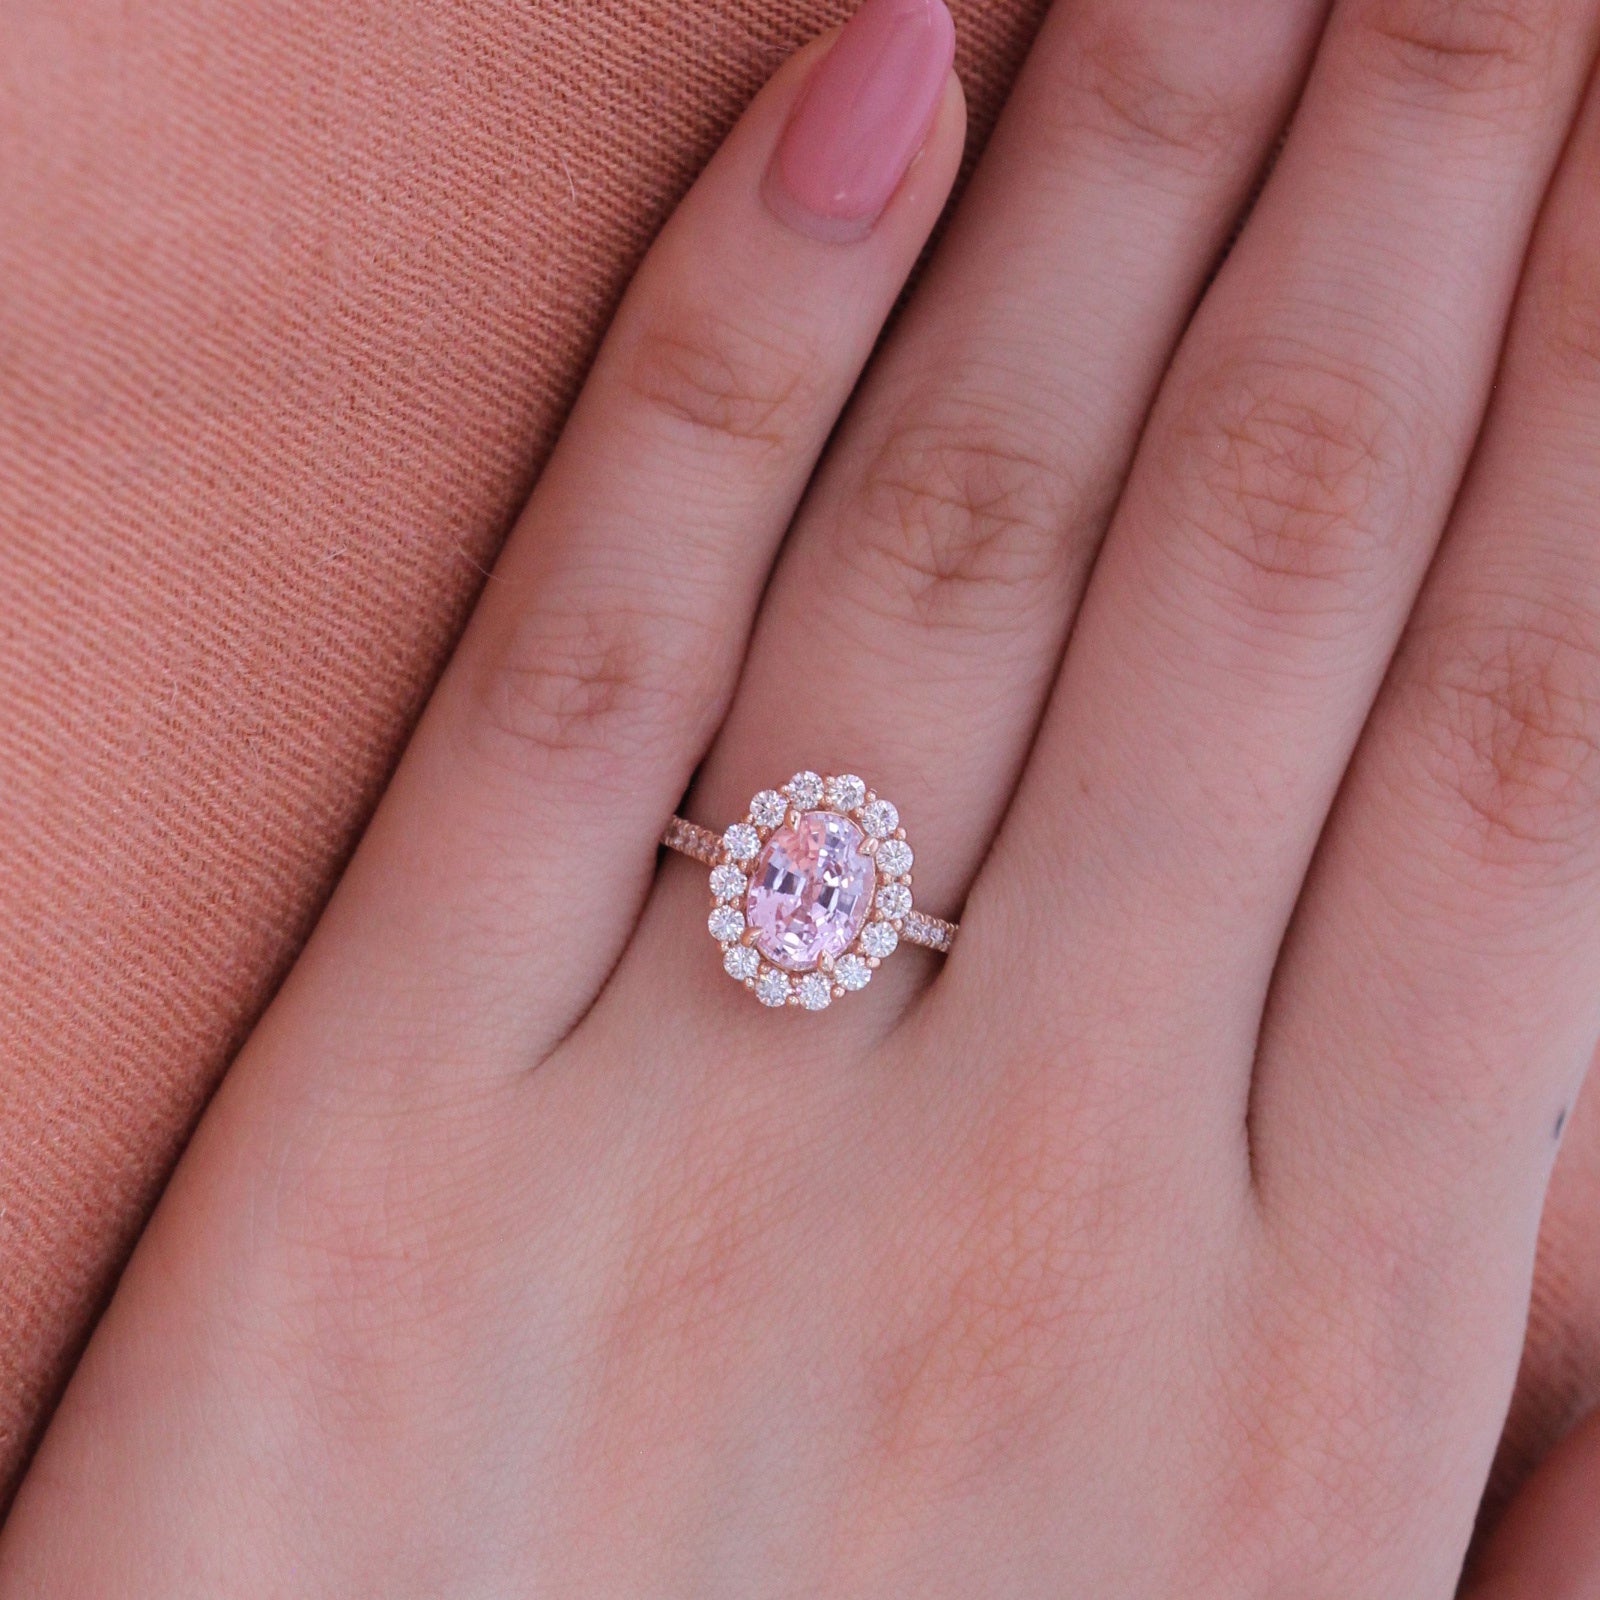 Soft Pink Sapphire and Diamond Engagement Ring or Signature Jewelry Piece